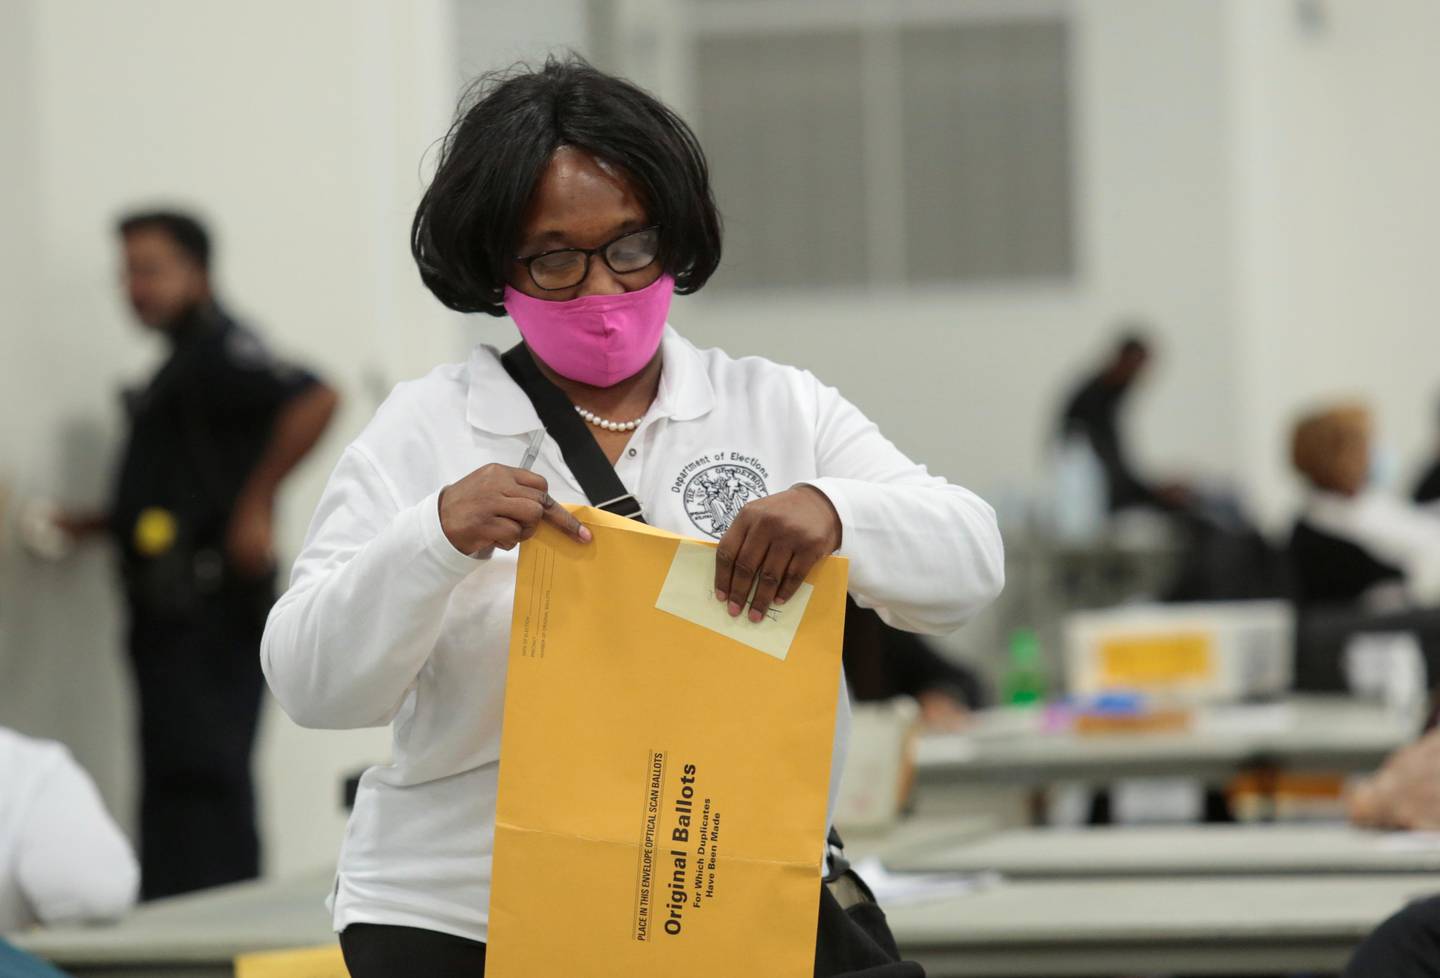 A poll worker supervisor handles an envelope of original ballots at the TCF center after Election Day in Detroit, Michigan, U.S., November 4, 2020. REUTERS/Rebecca Cook